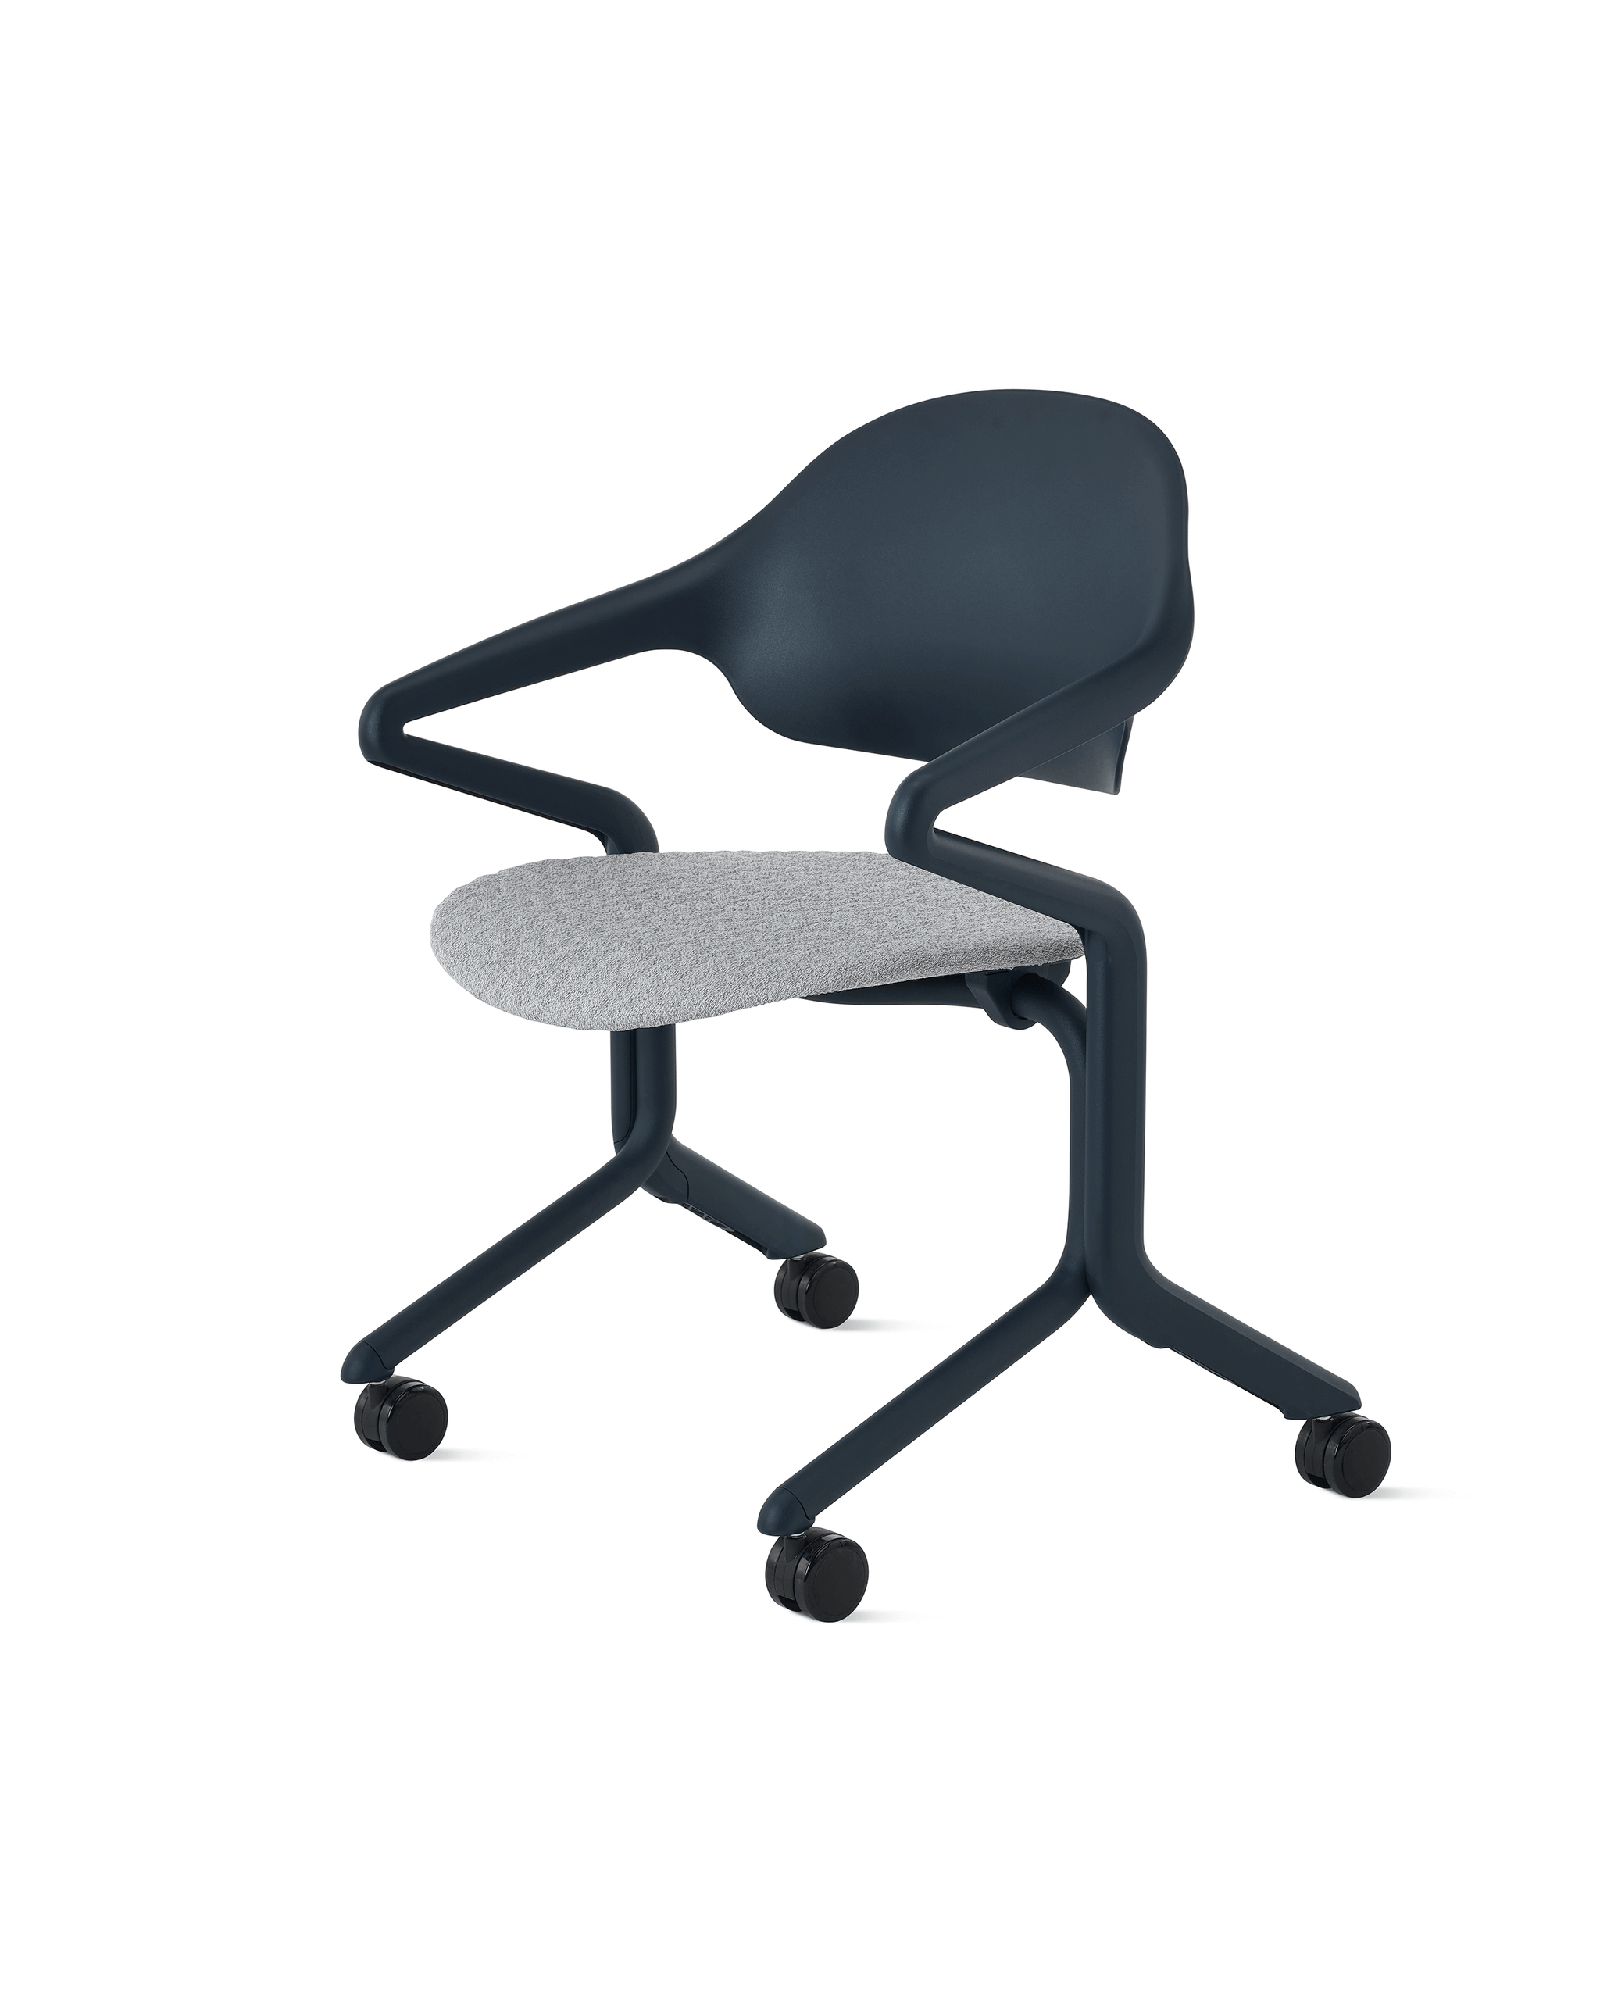 Single Flux nesting chair with blue frame and grey seat